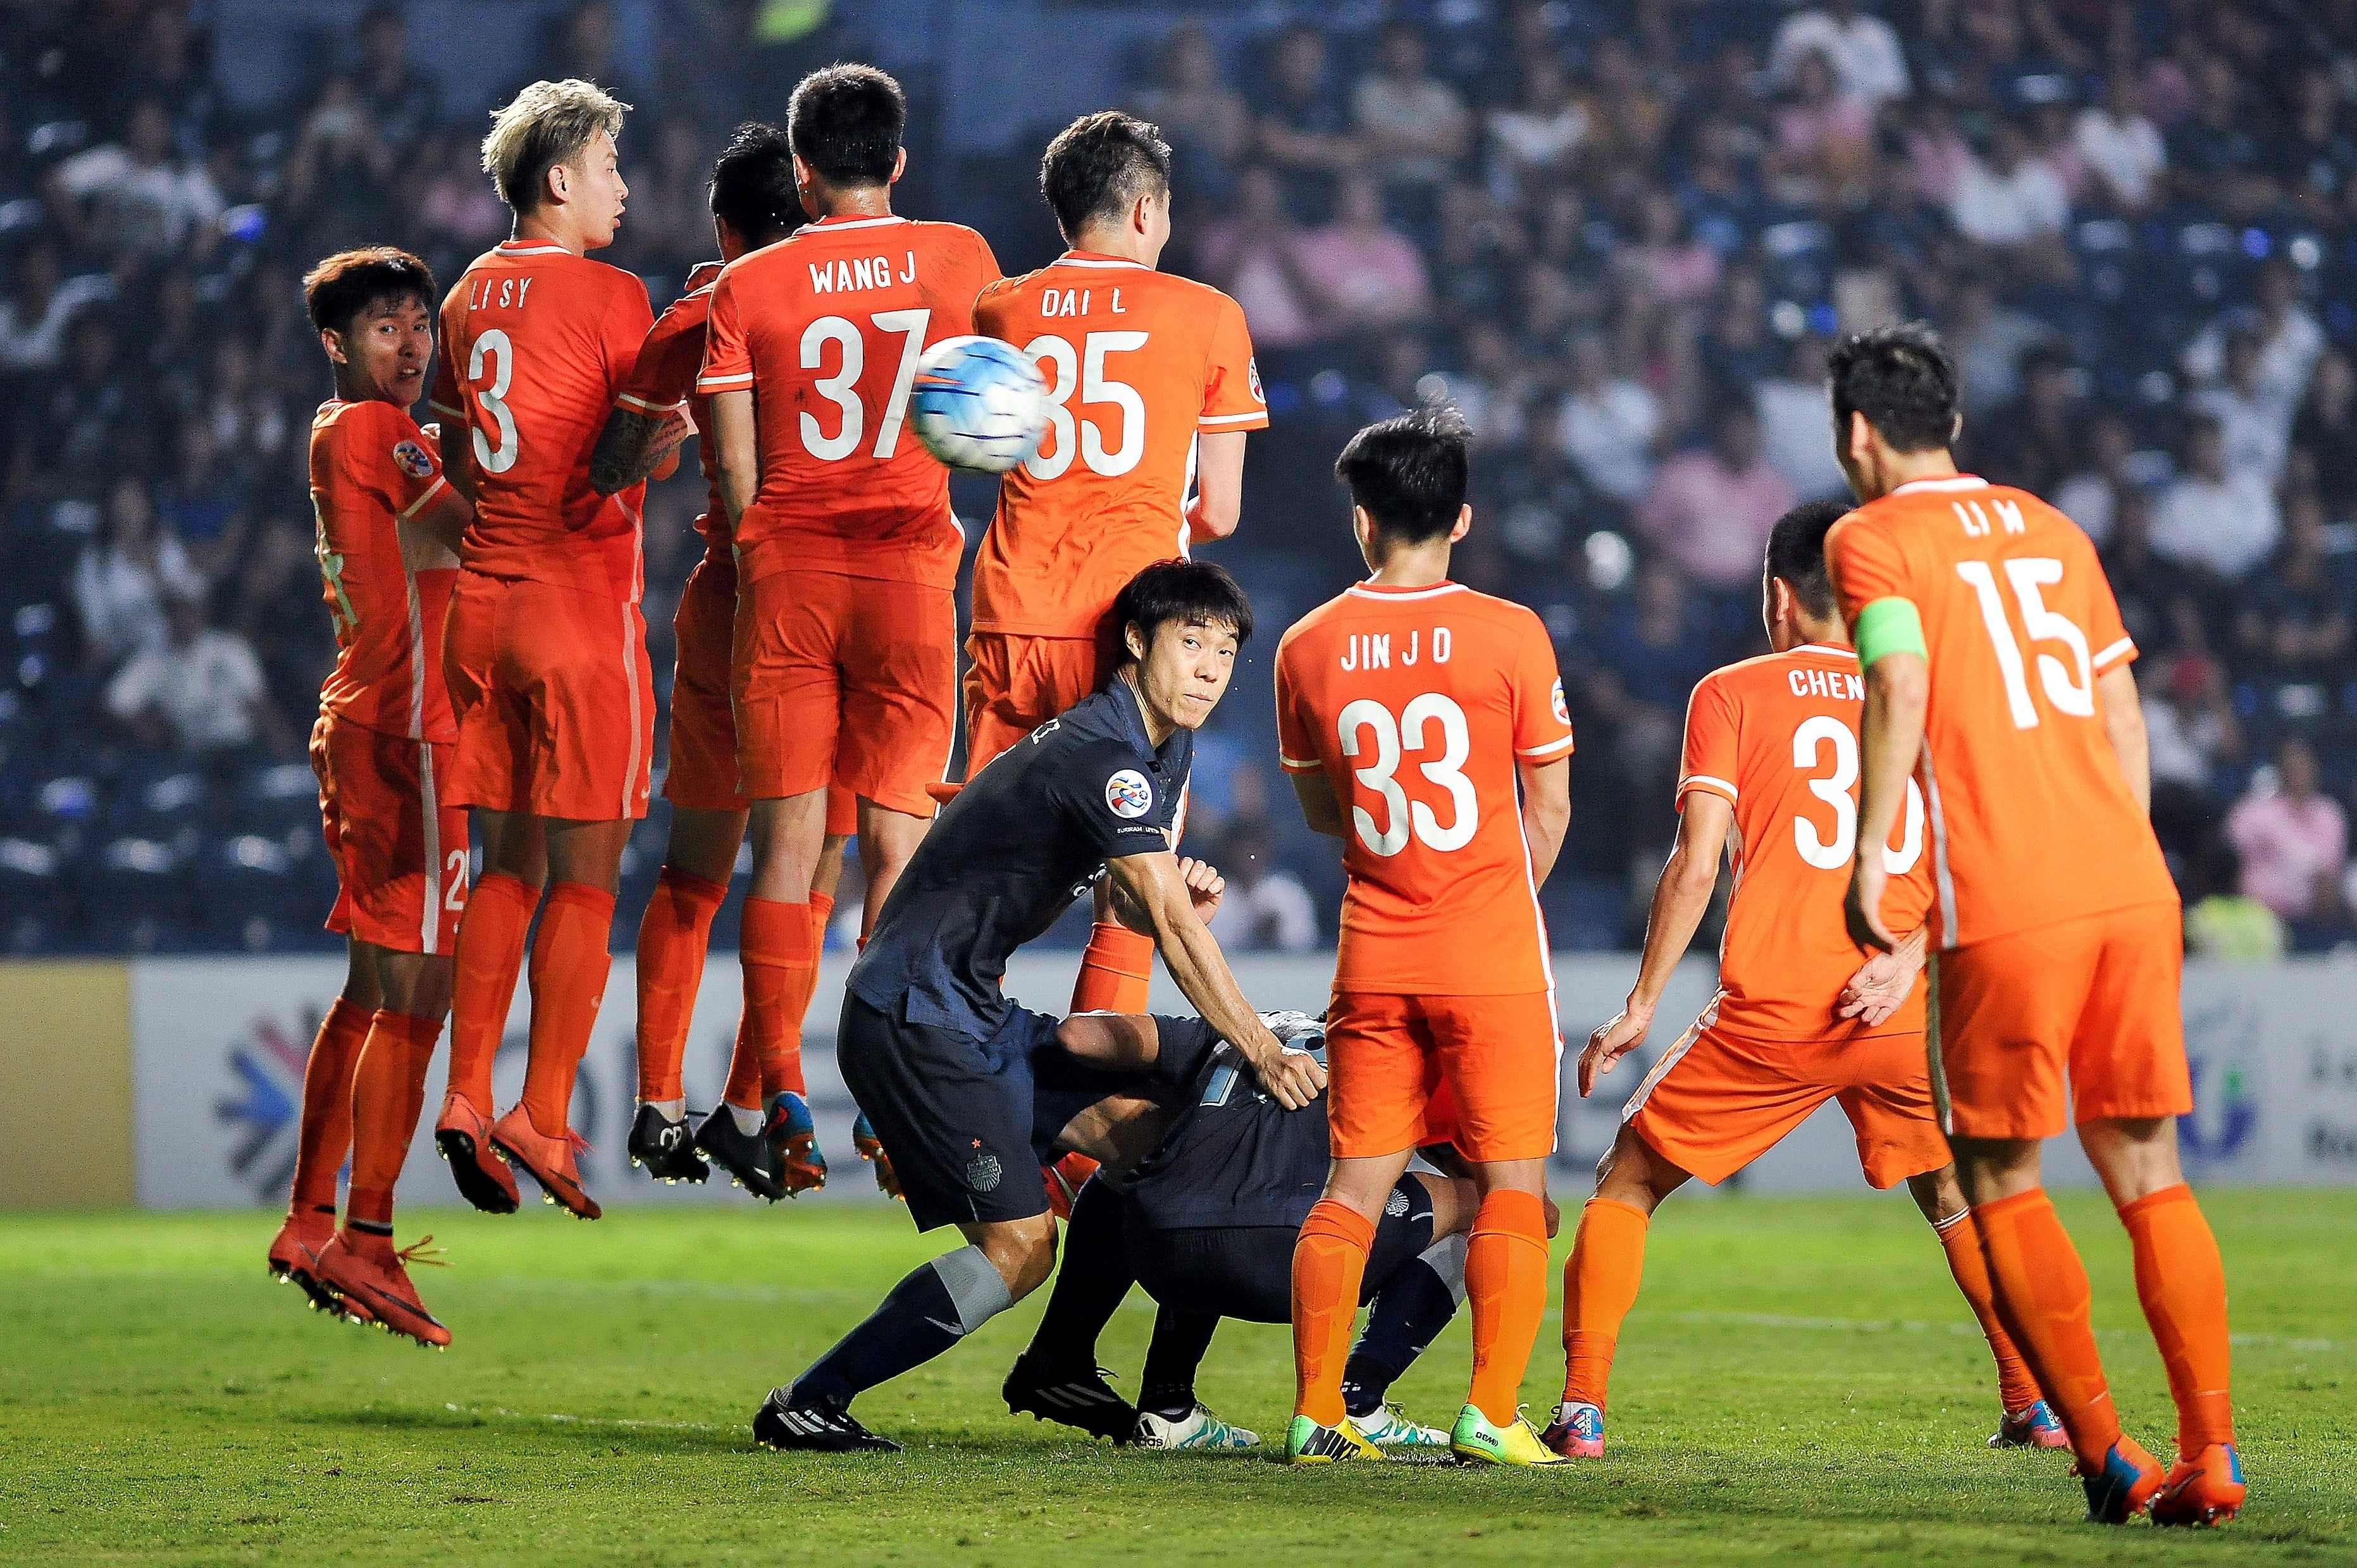 Shangdong Luneng players jump to counter a free kick by Buriram United in their AFC Champions League game in Thailand. Photo: AFP